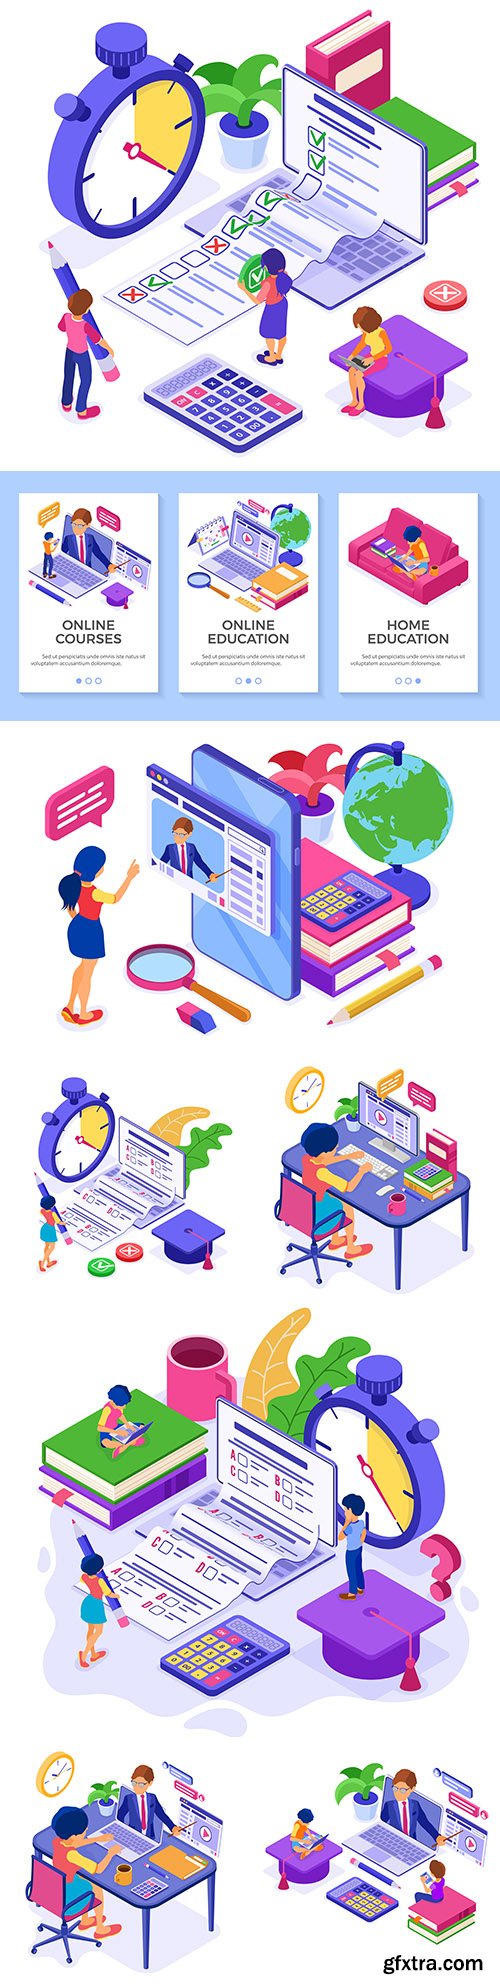 Online distance learning from home isometric illustrations